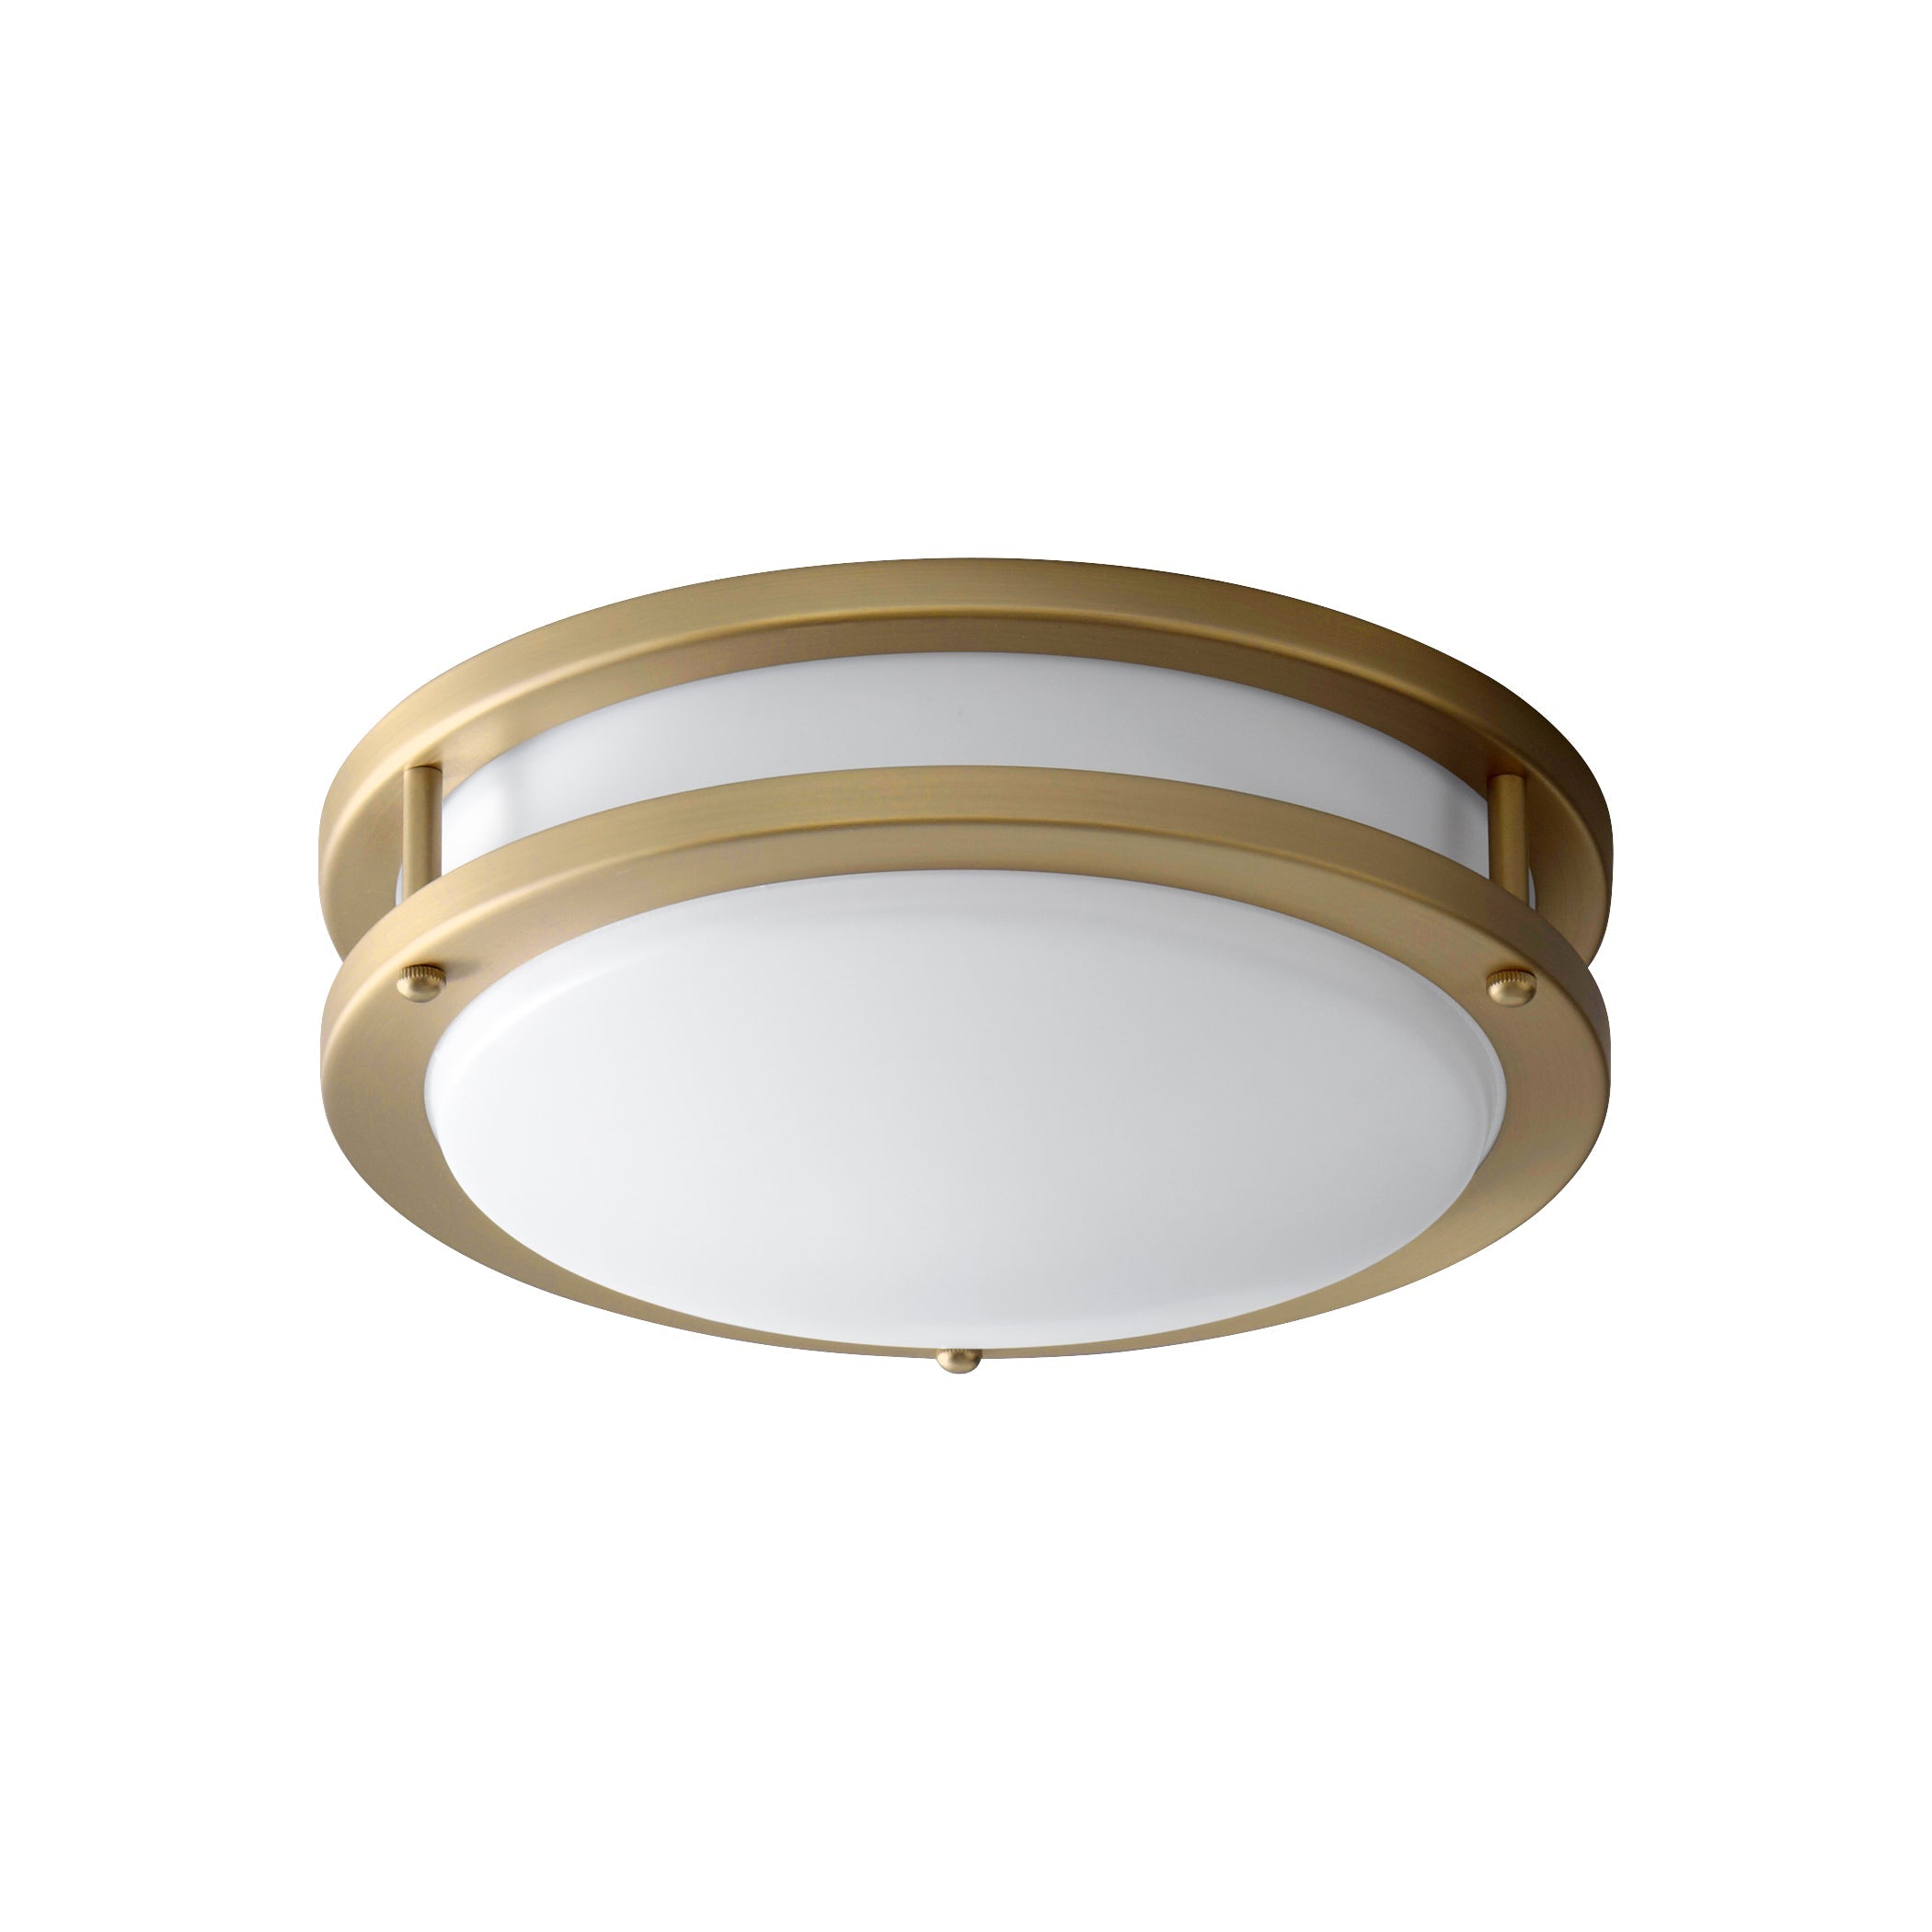 Oxygen Oracle 3-618-40 Ceiling Mount - Aged Brass